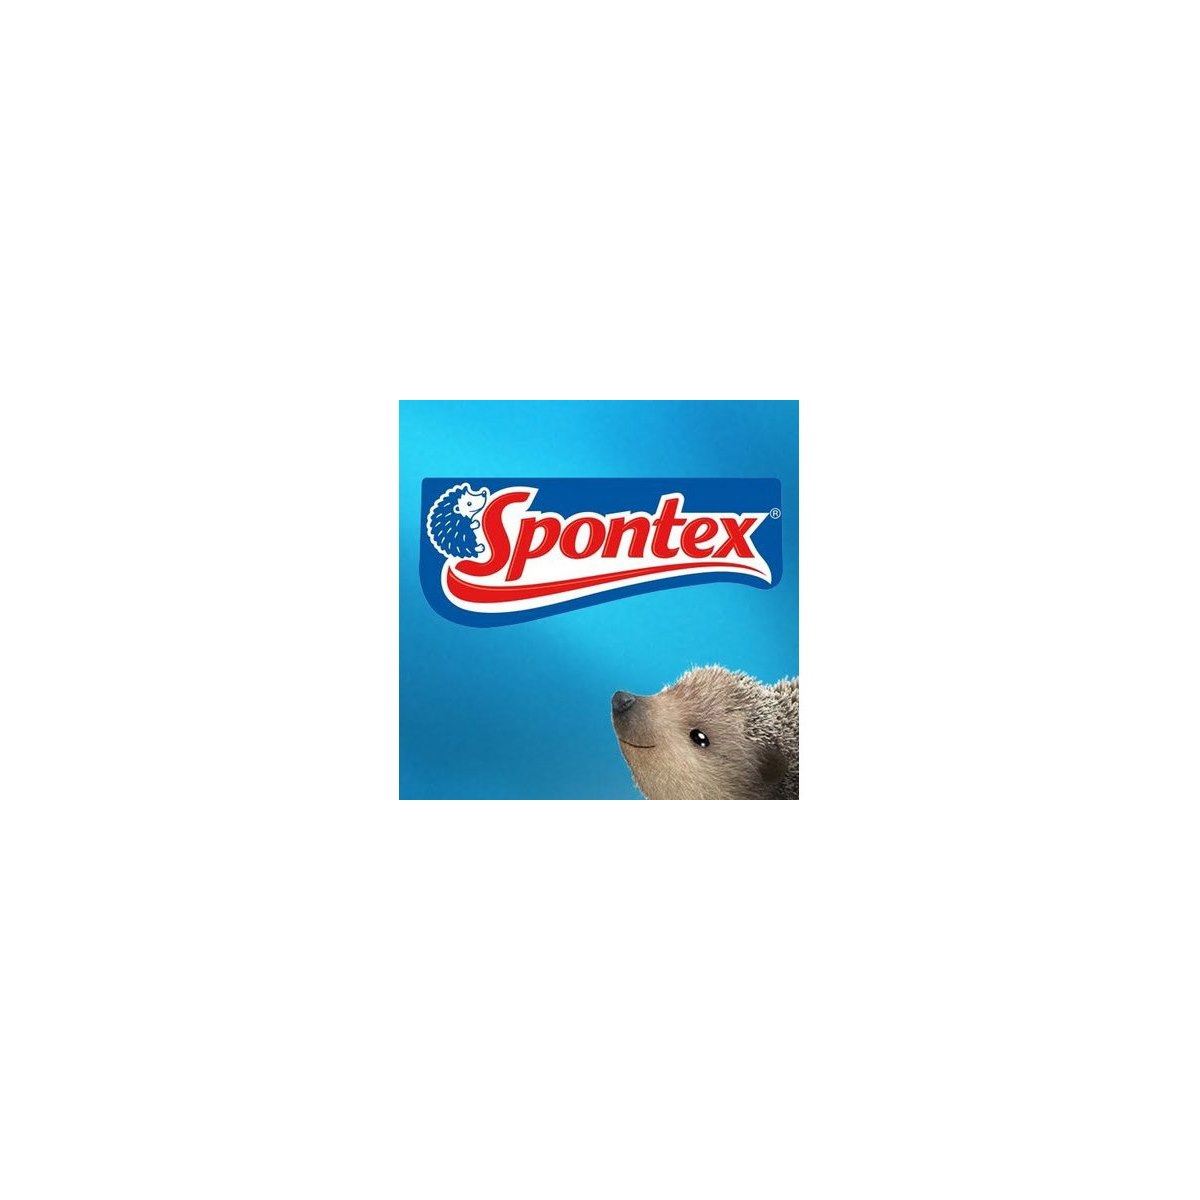 Where to Buy Spontex Products